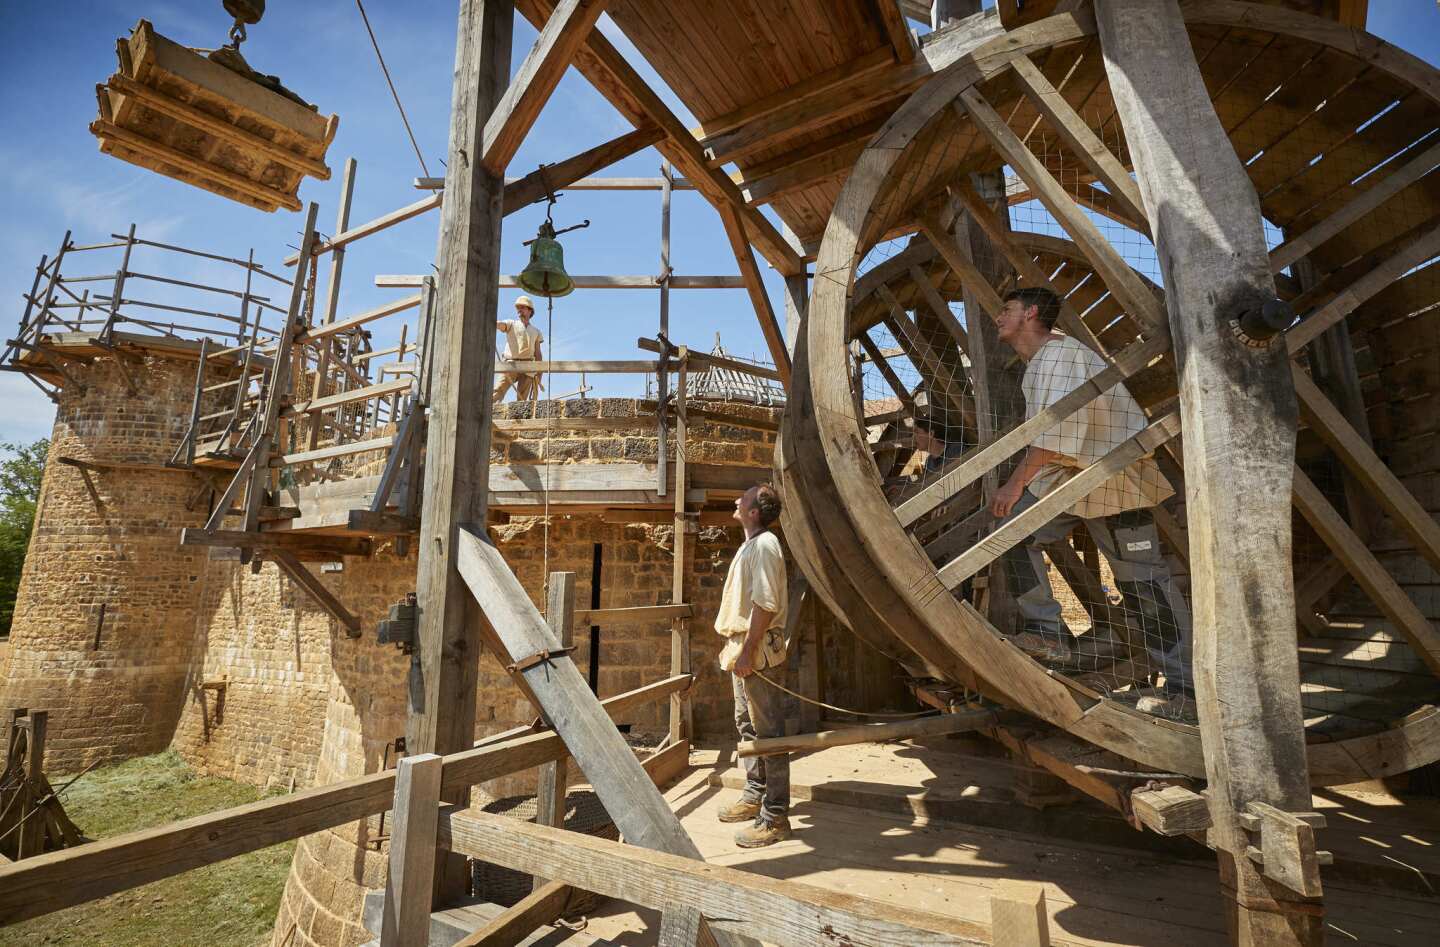 Masons drive the treadwheel crane at Guedelon medieval castle project, a back-to-the-future project re-creating a 13th century castle from scratch in the heart of Burgundy, central France.